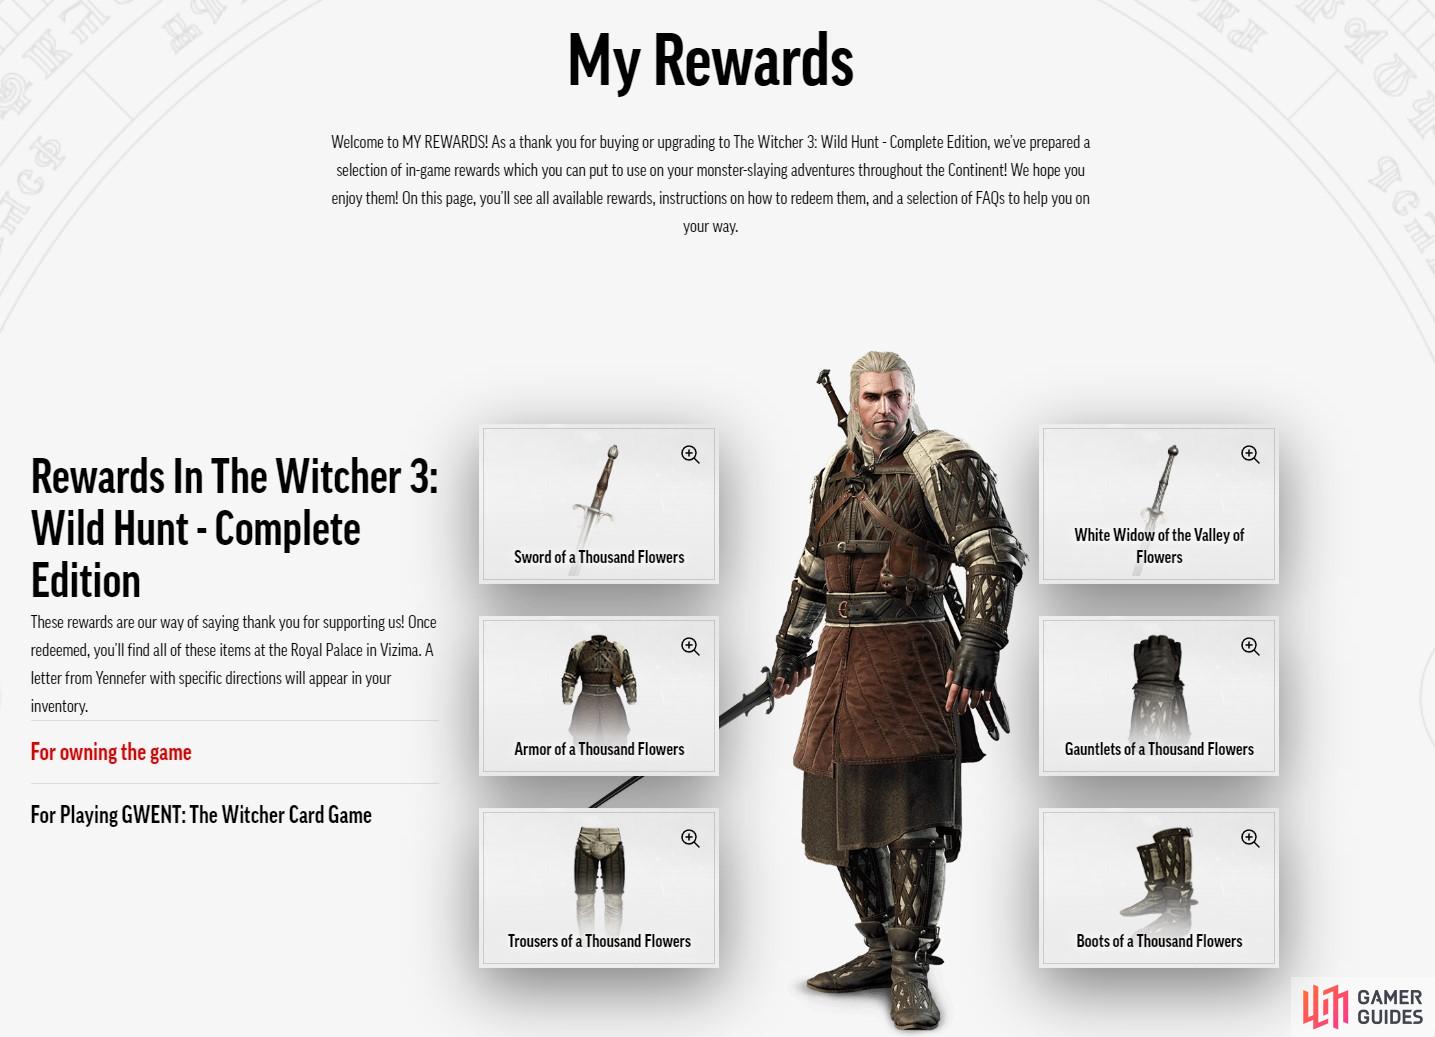 The Witcher 3 Rewards page is now live.